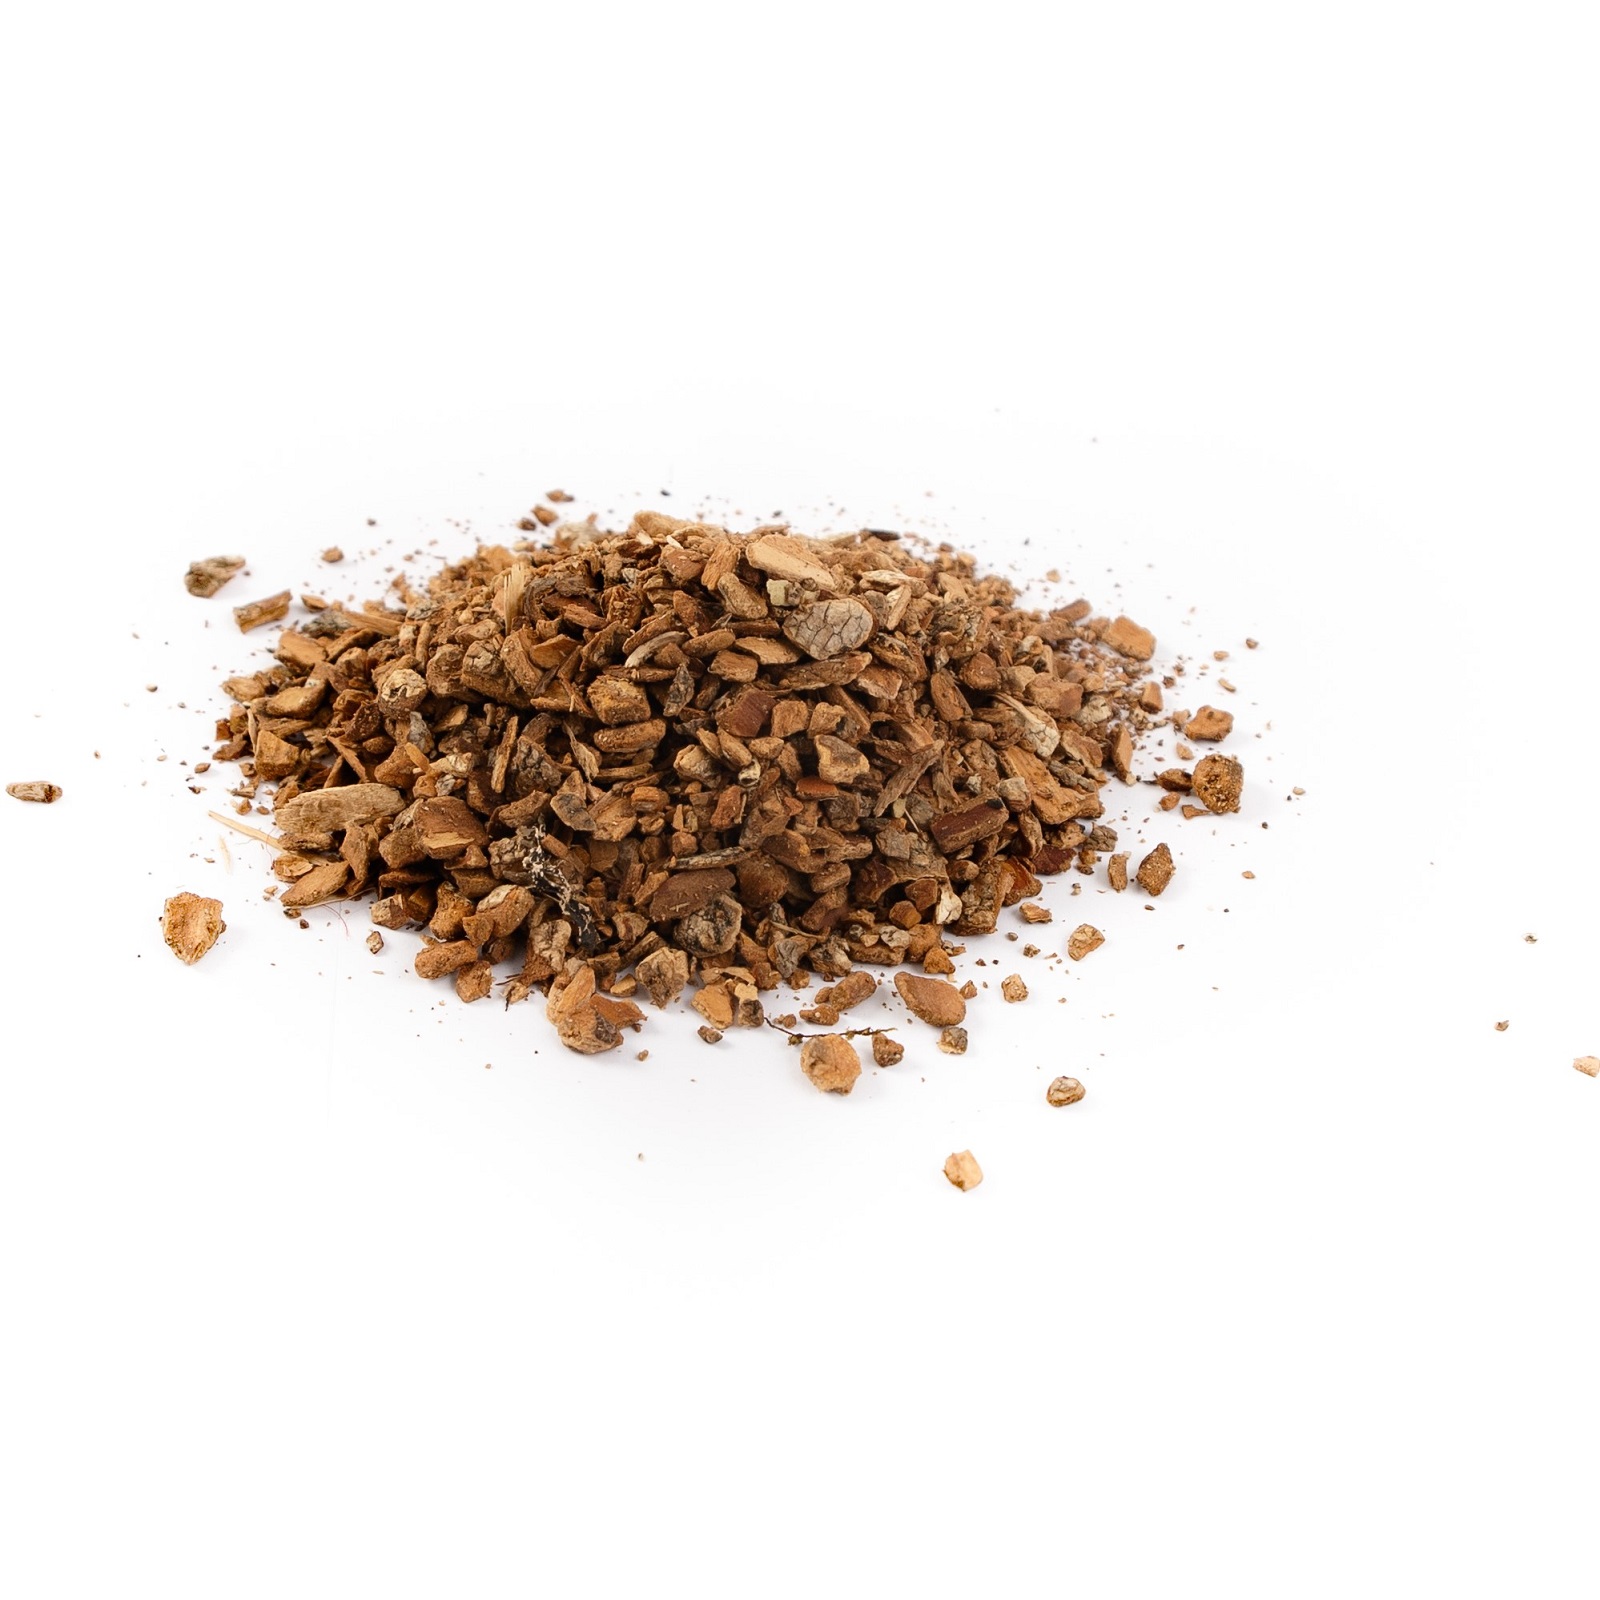 Cramp bark: The details on how and why you should use it